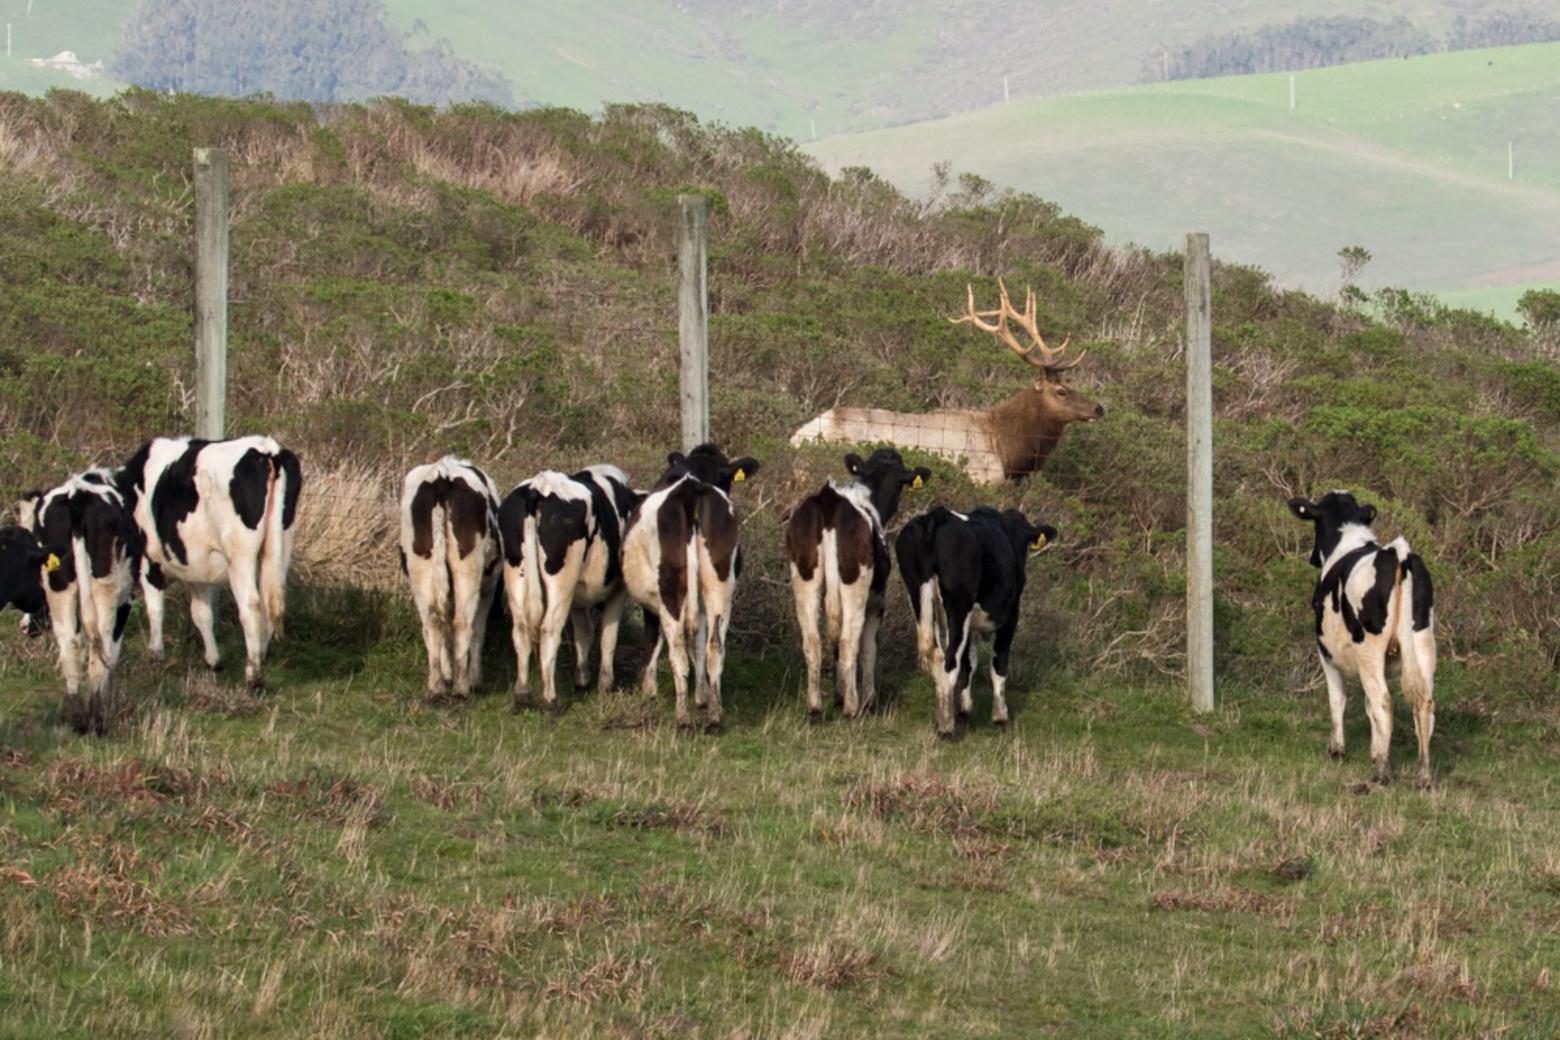 Whose interests should the headlands of Point Reyes National Seashore serve? For some it depends upon which side of the fence you choose to interpret the question. Photo courtesy Daniel Dietrich